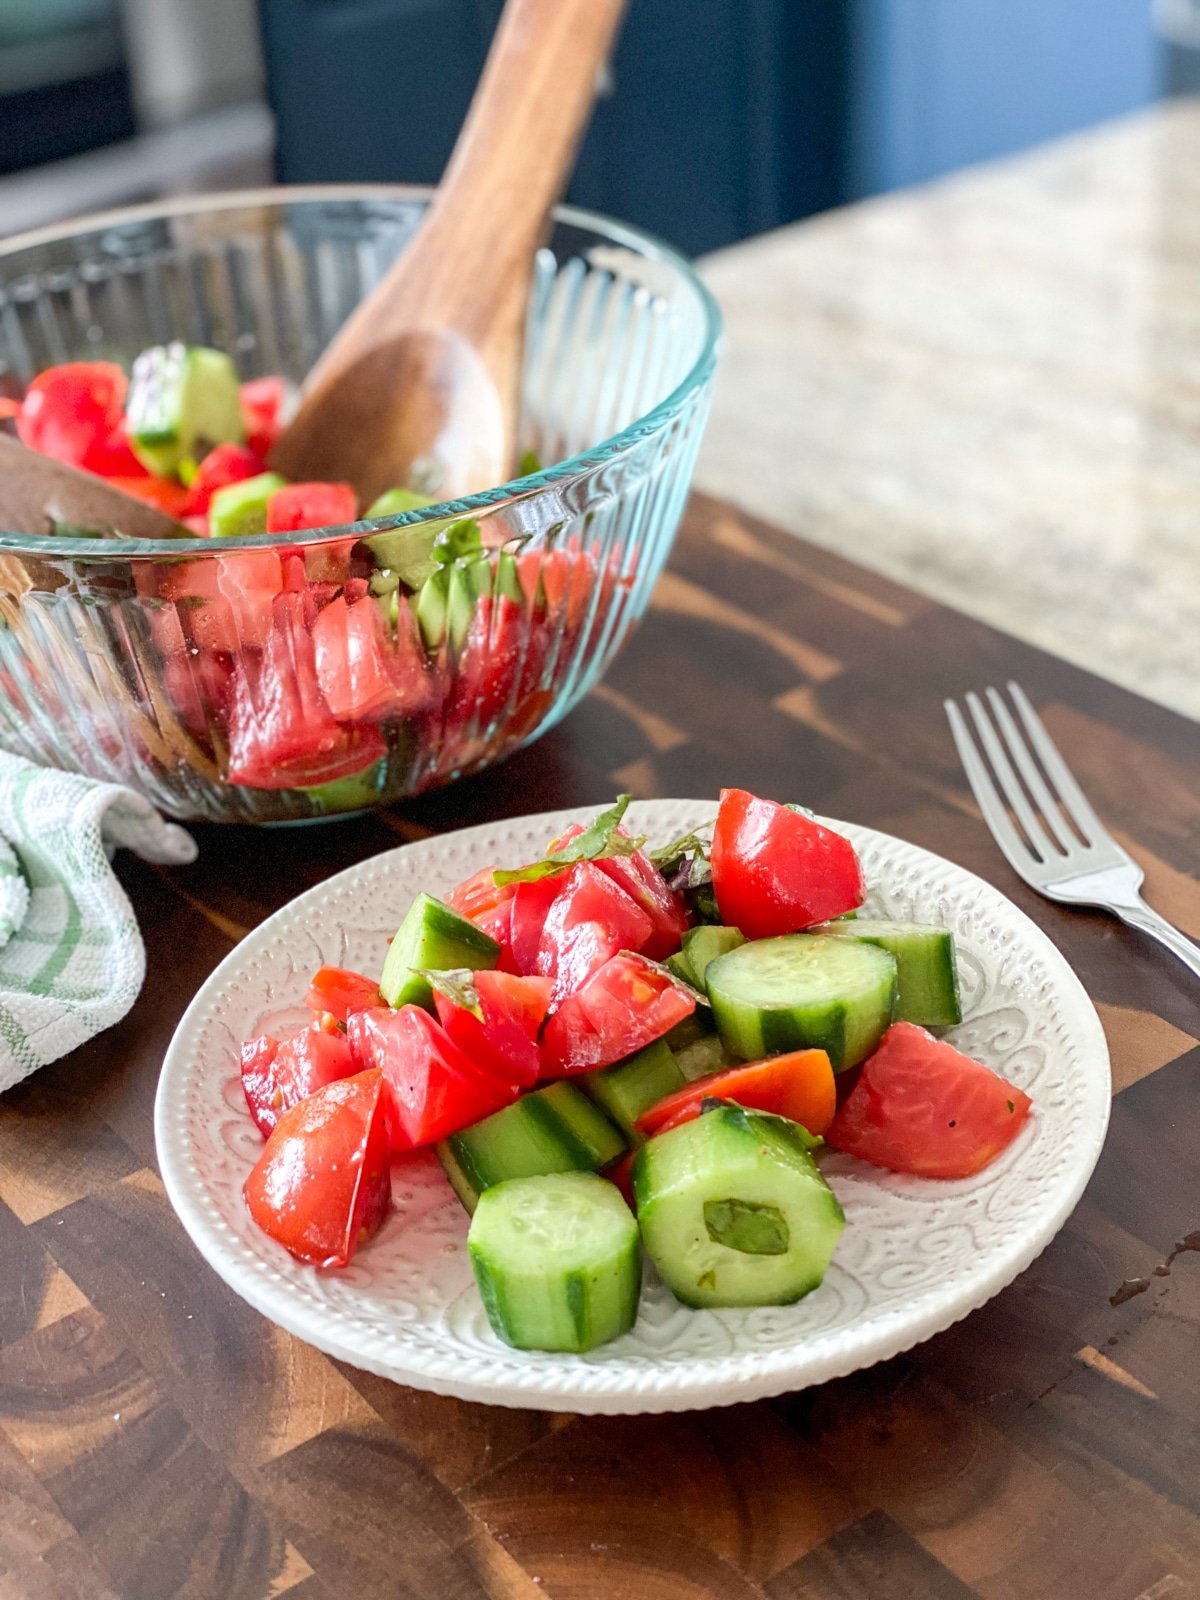 serving salad with tomatoes and cucumbers